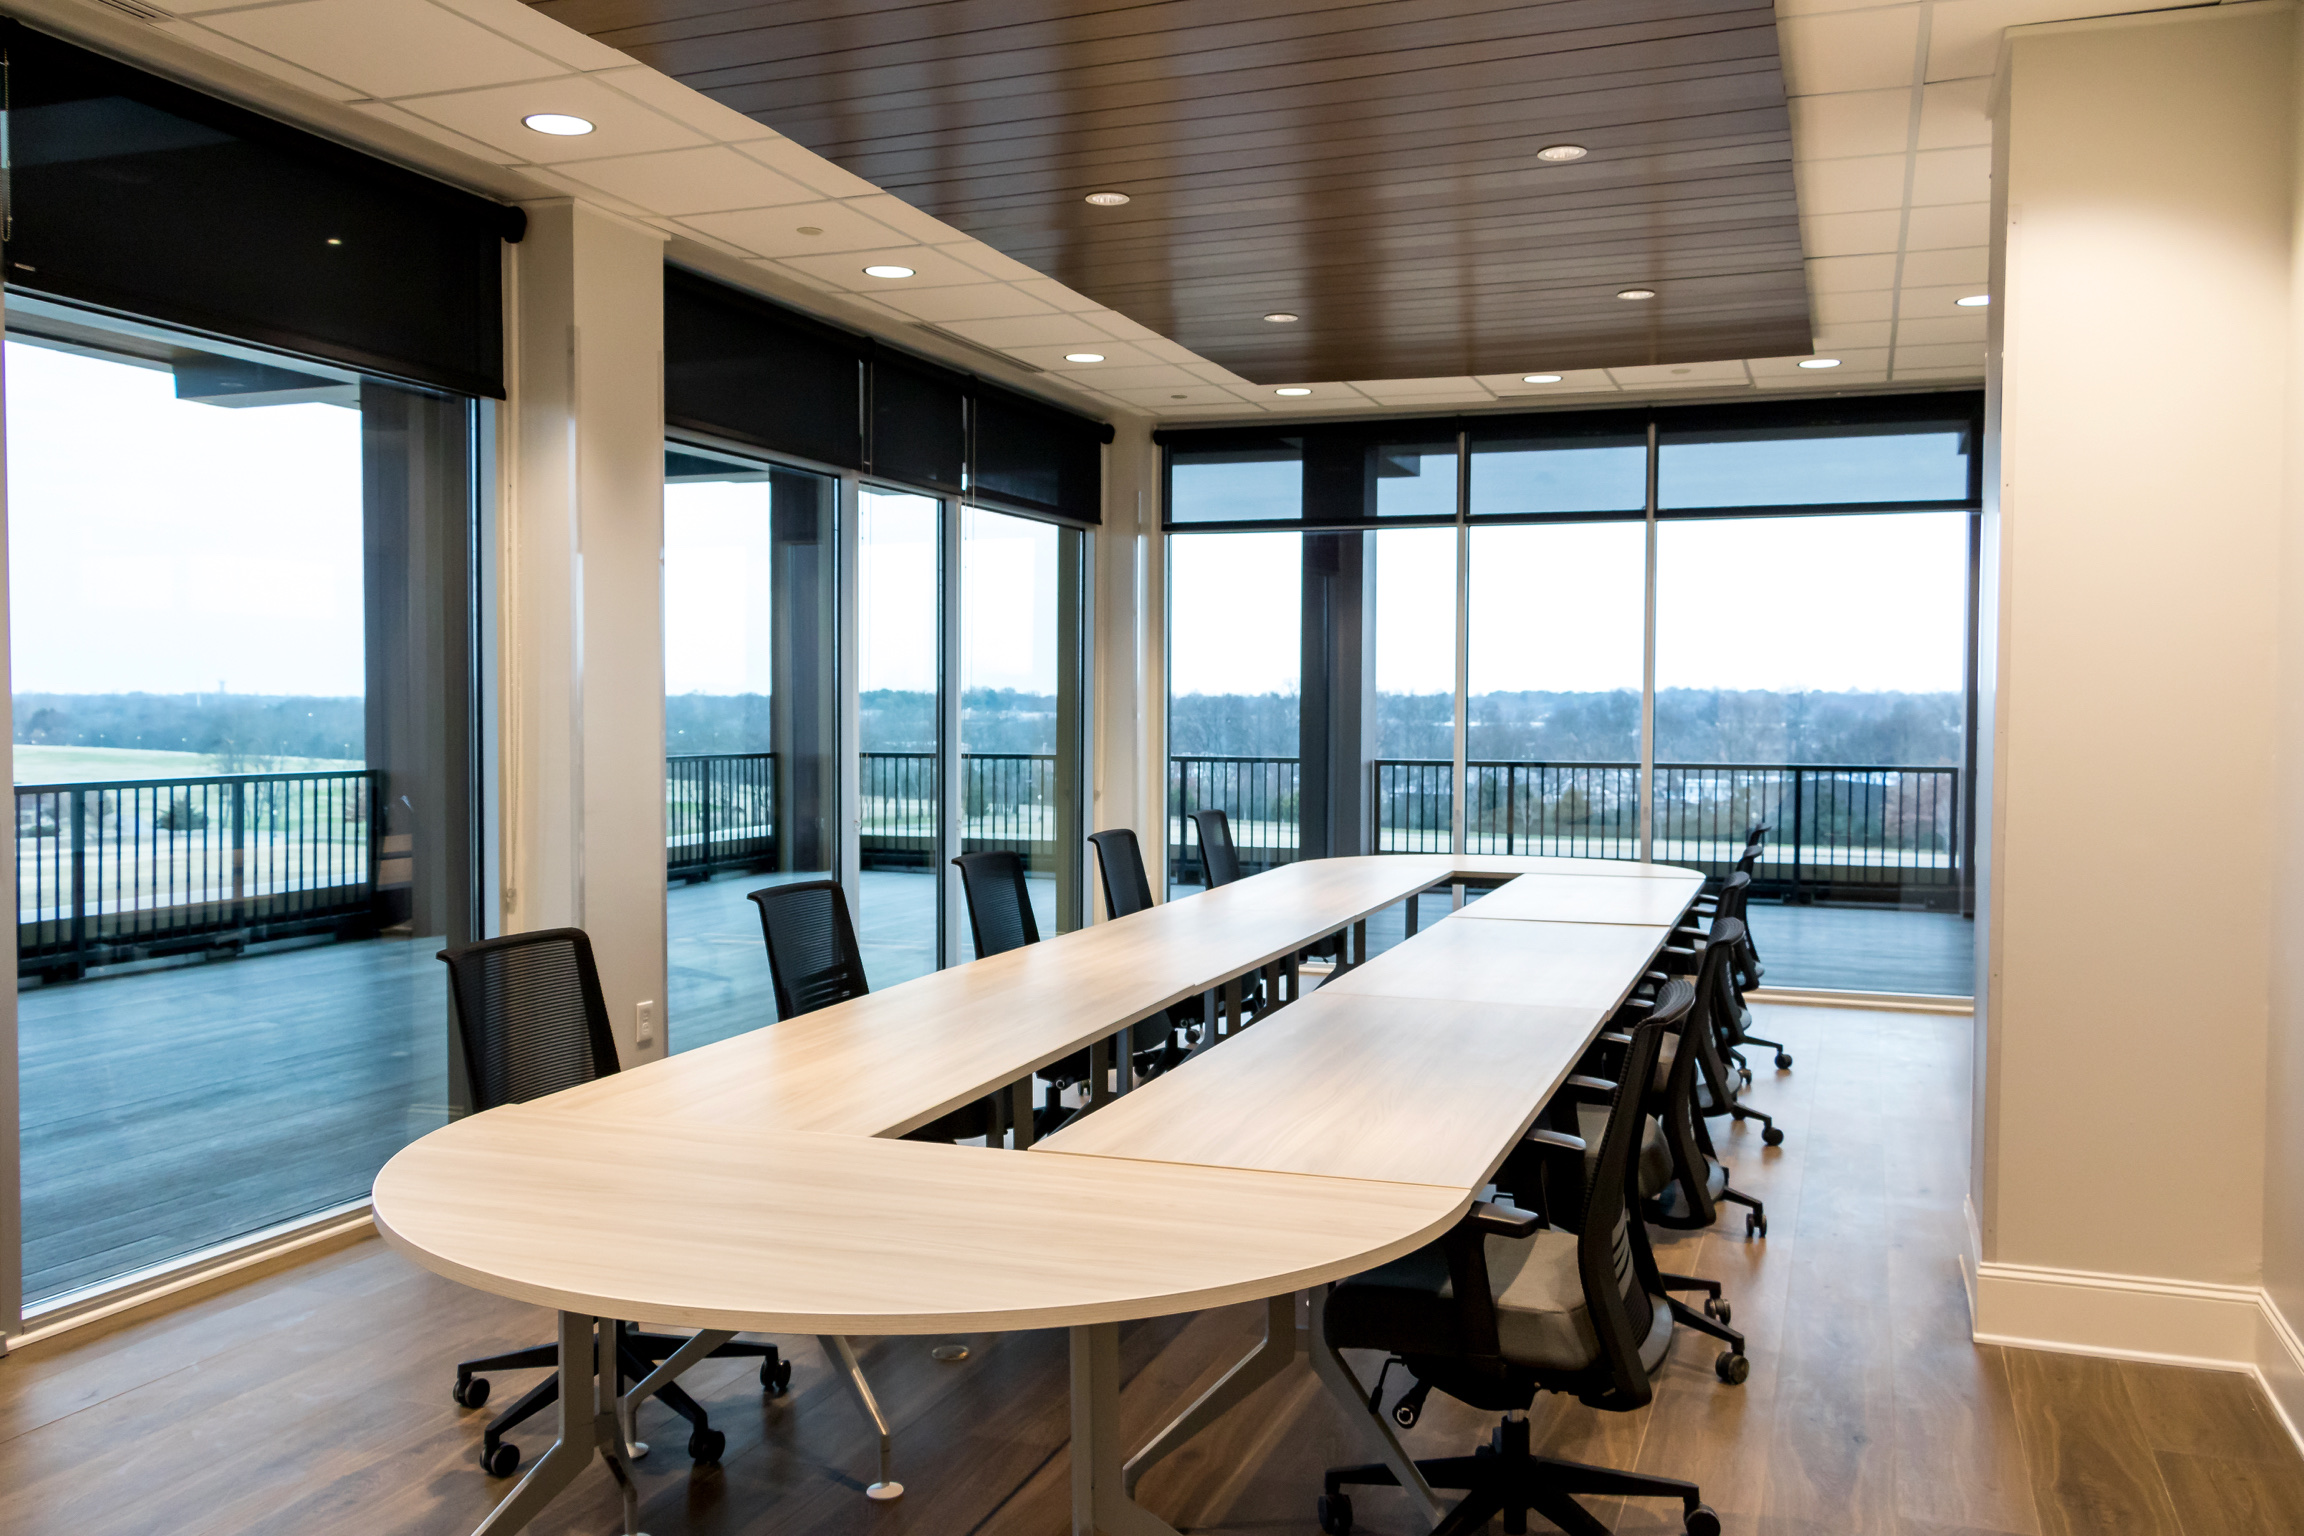 Corporate Event Venue Meeting Space - The Board Room